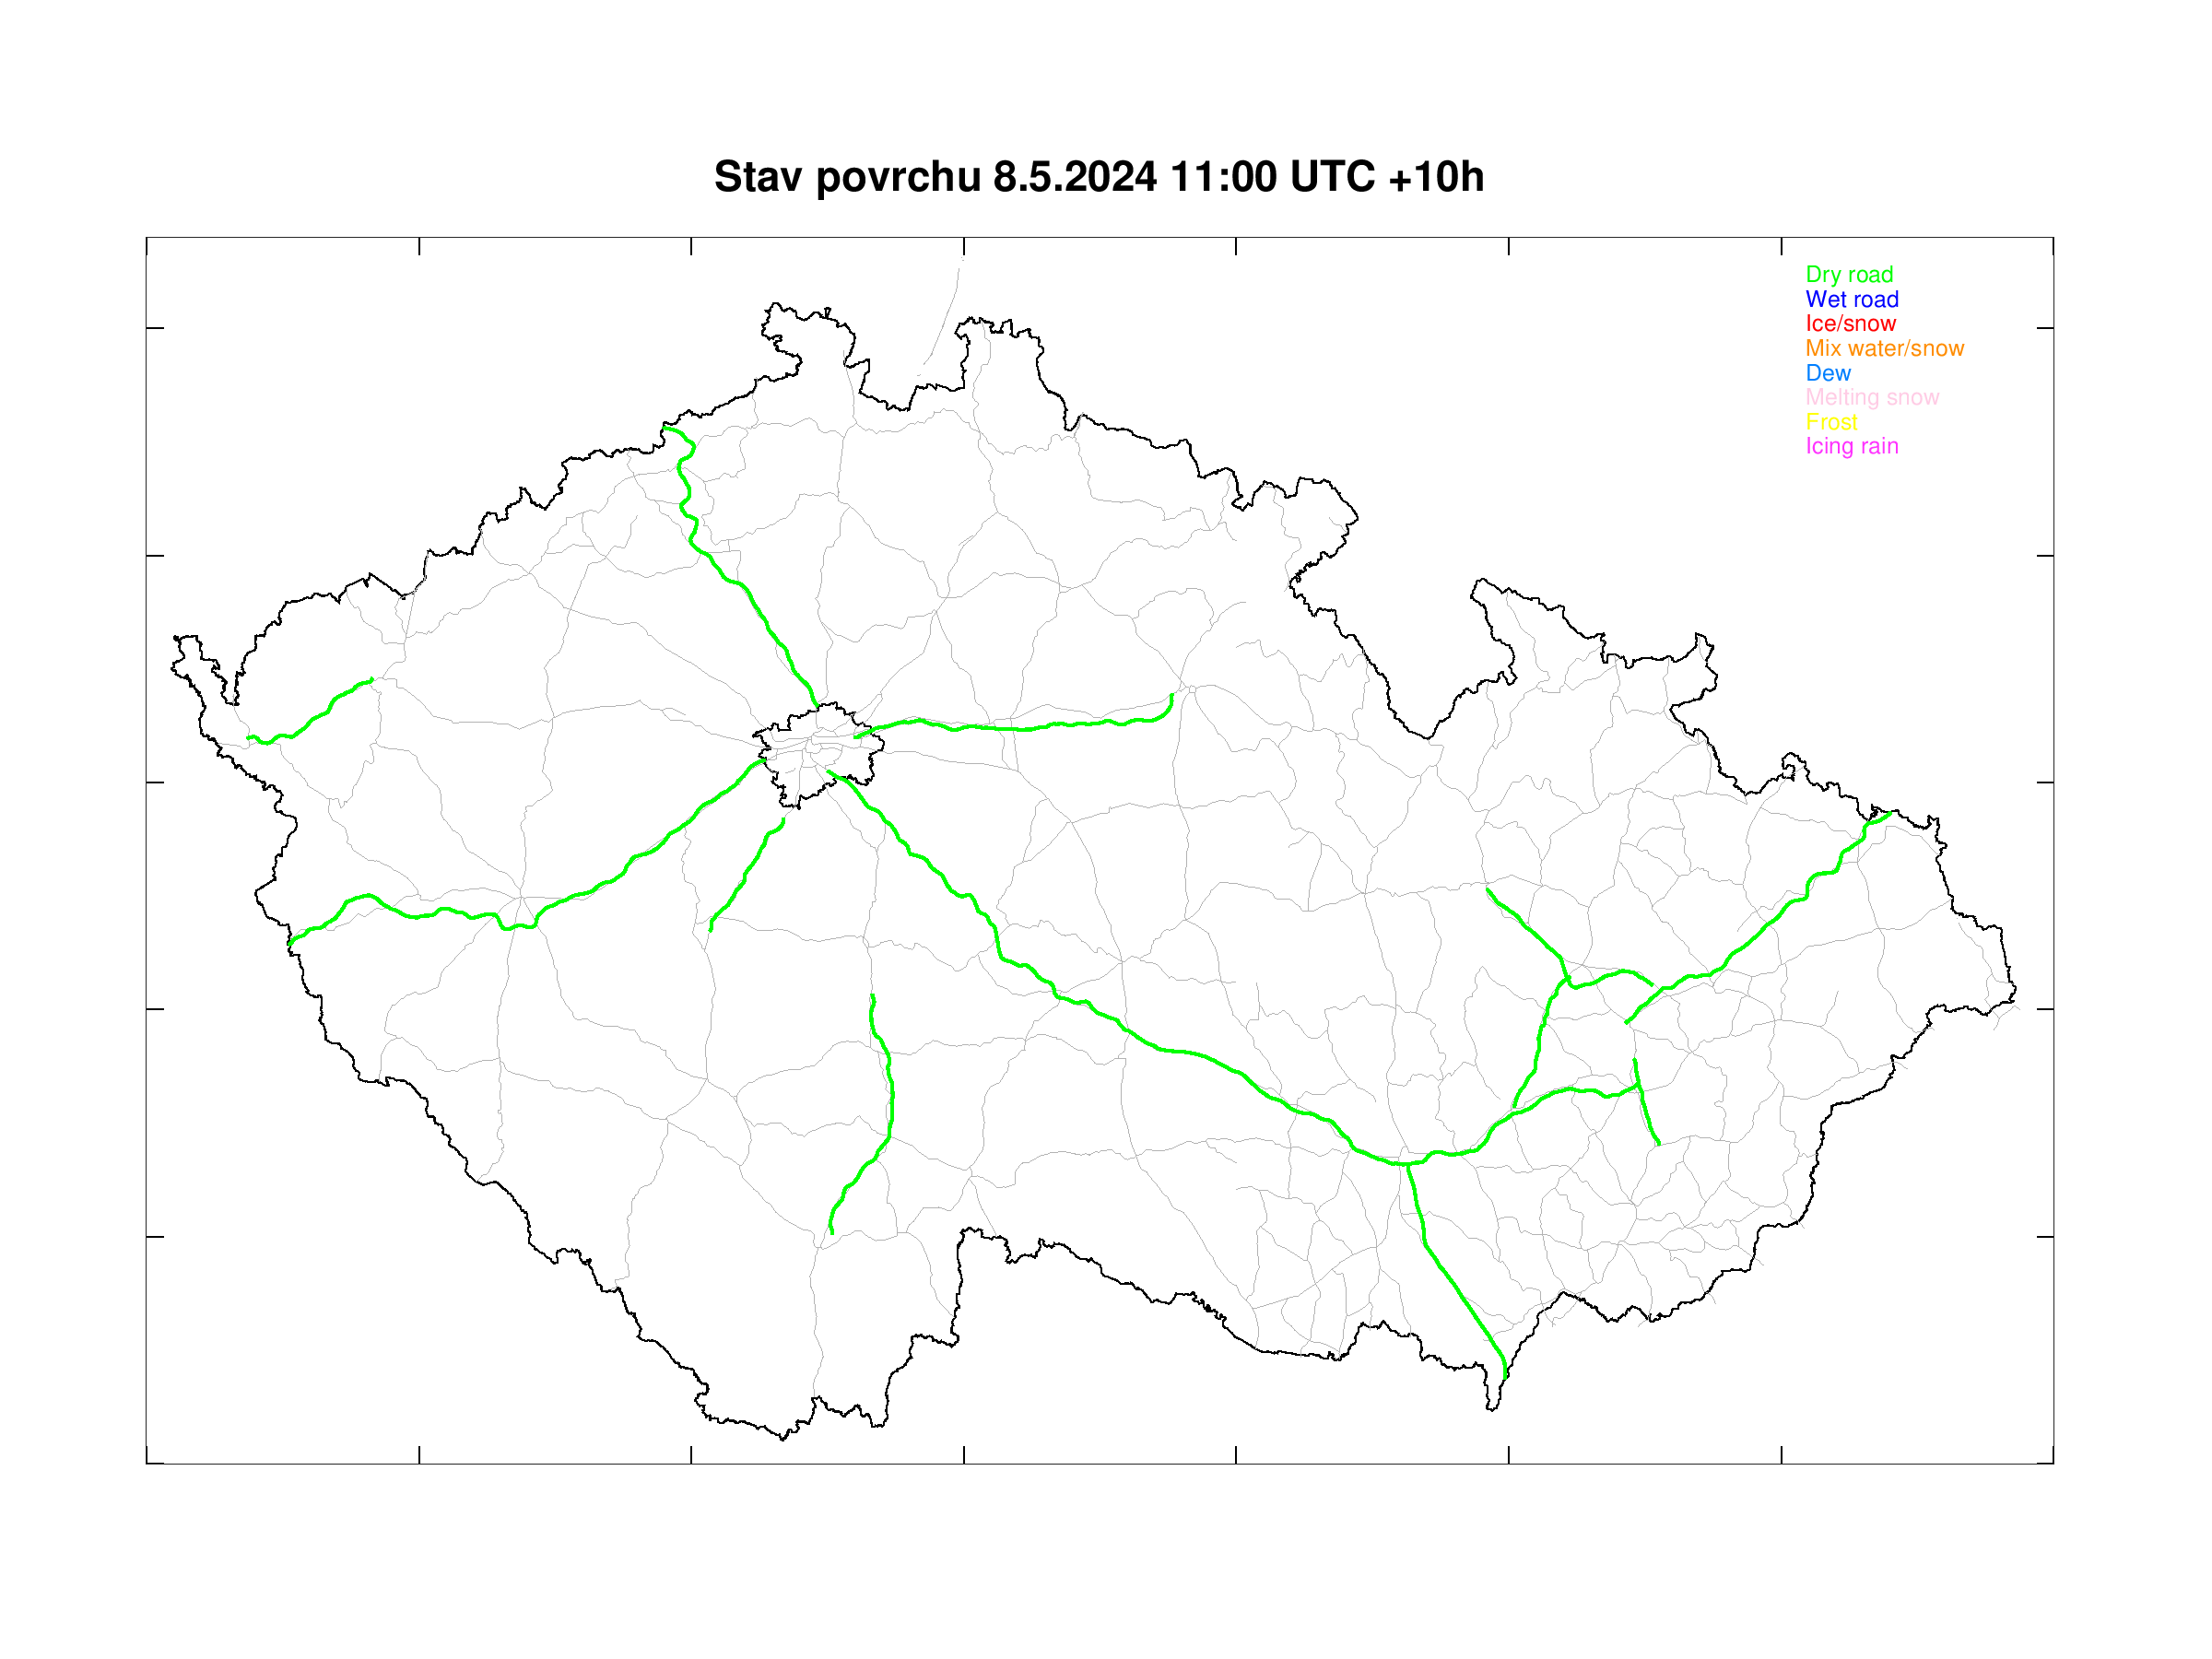 Road surface condition forecast for Czech highways +10h